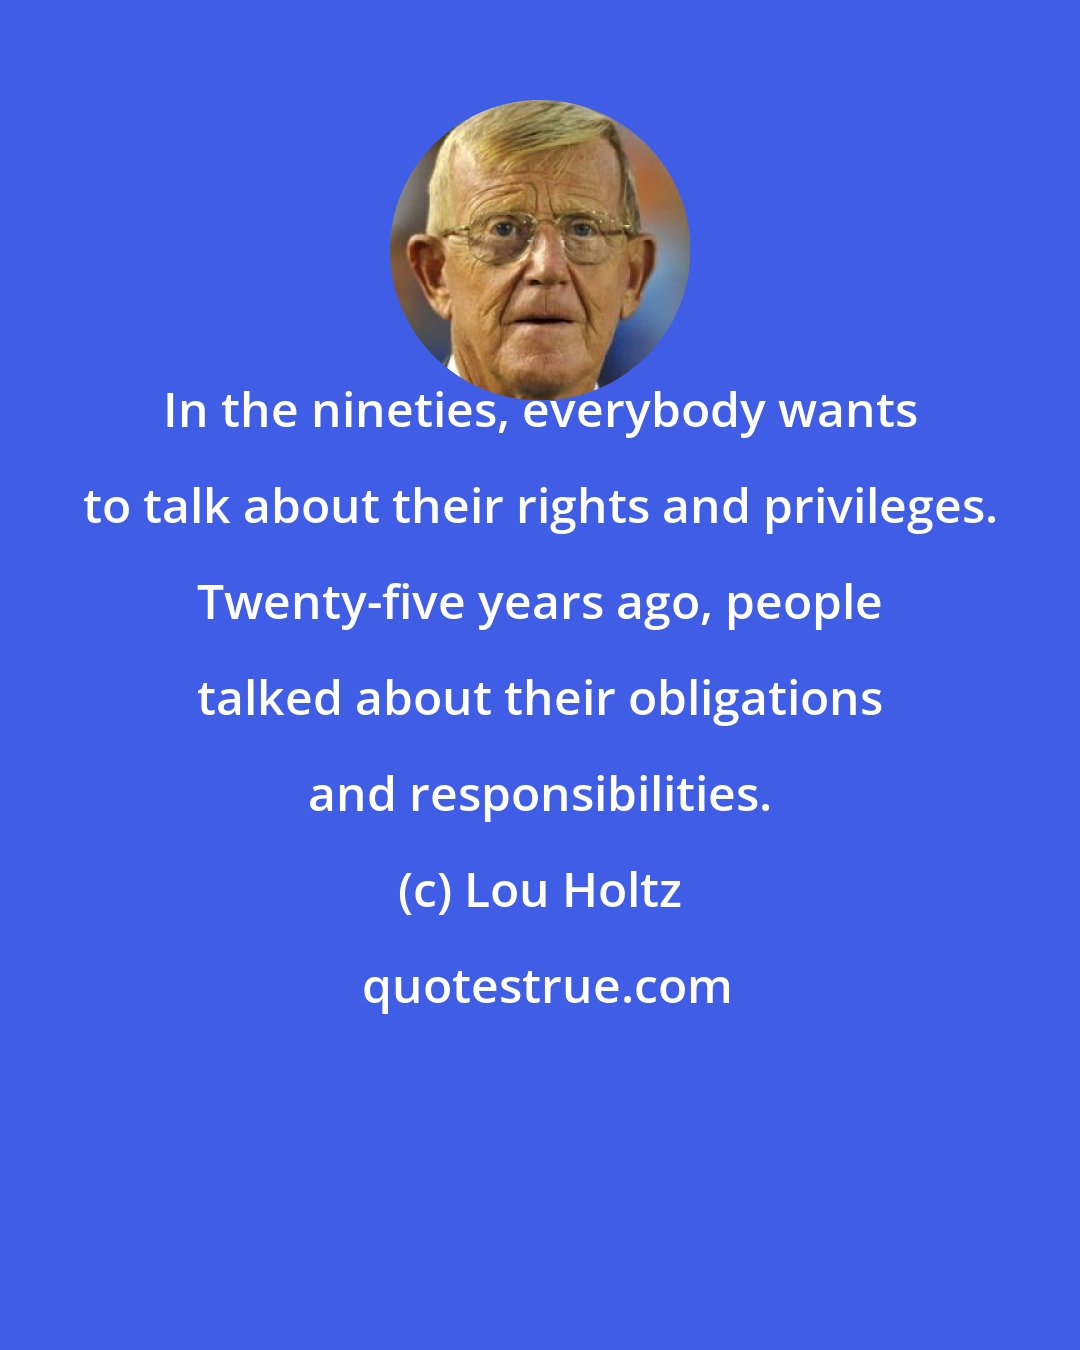 Lou Holtz: In the nineties, everybody wants to talk about their rights and privileges. Twenty-five years ago, people talked about their obligations and responsibilities.